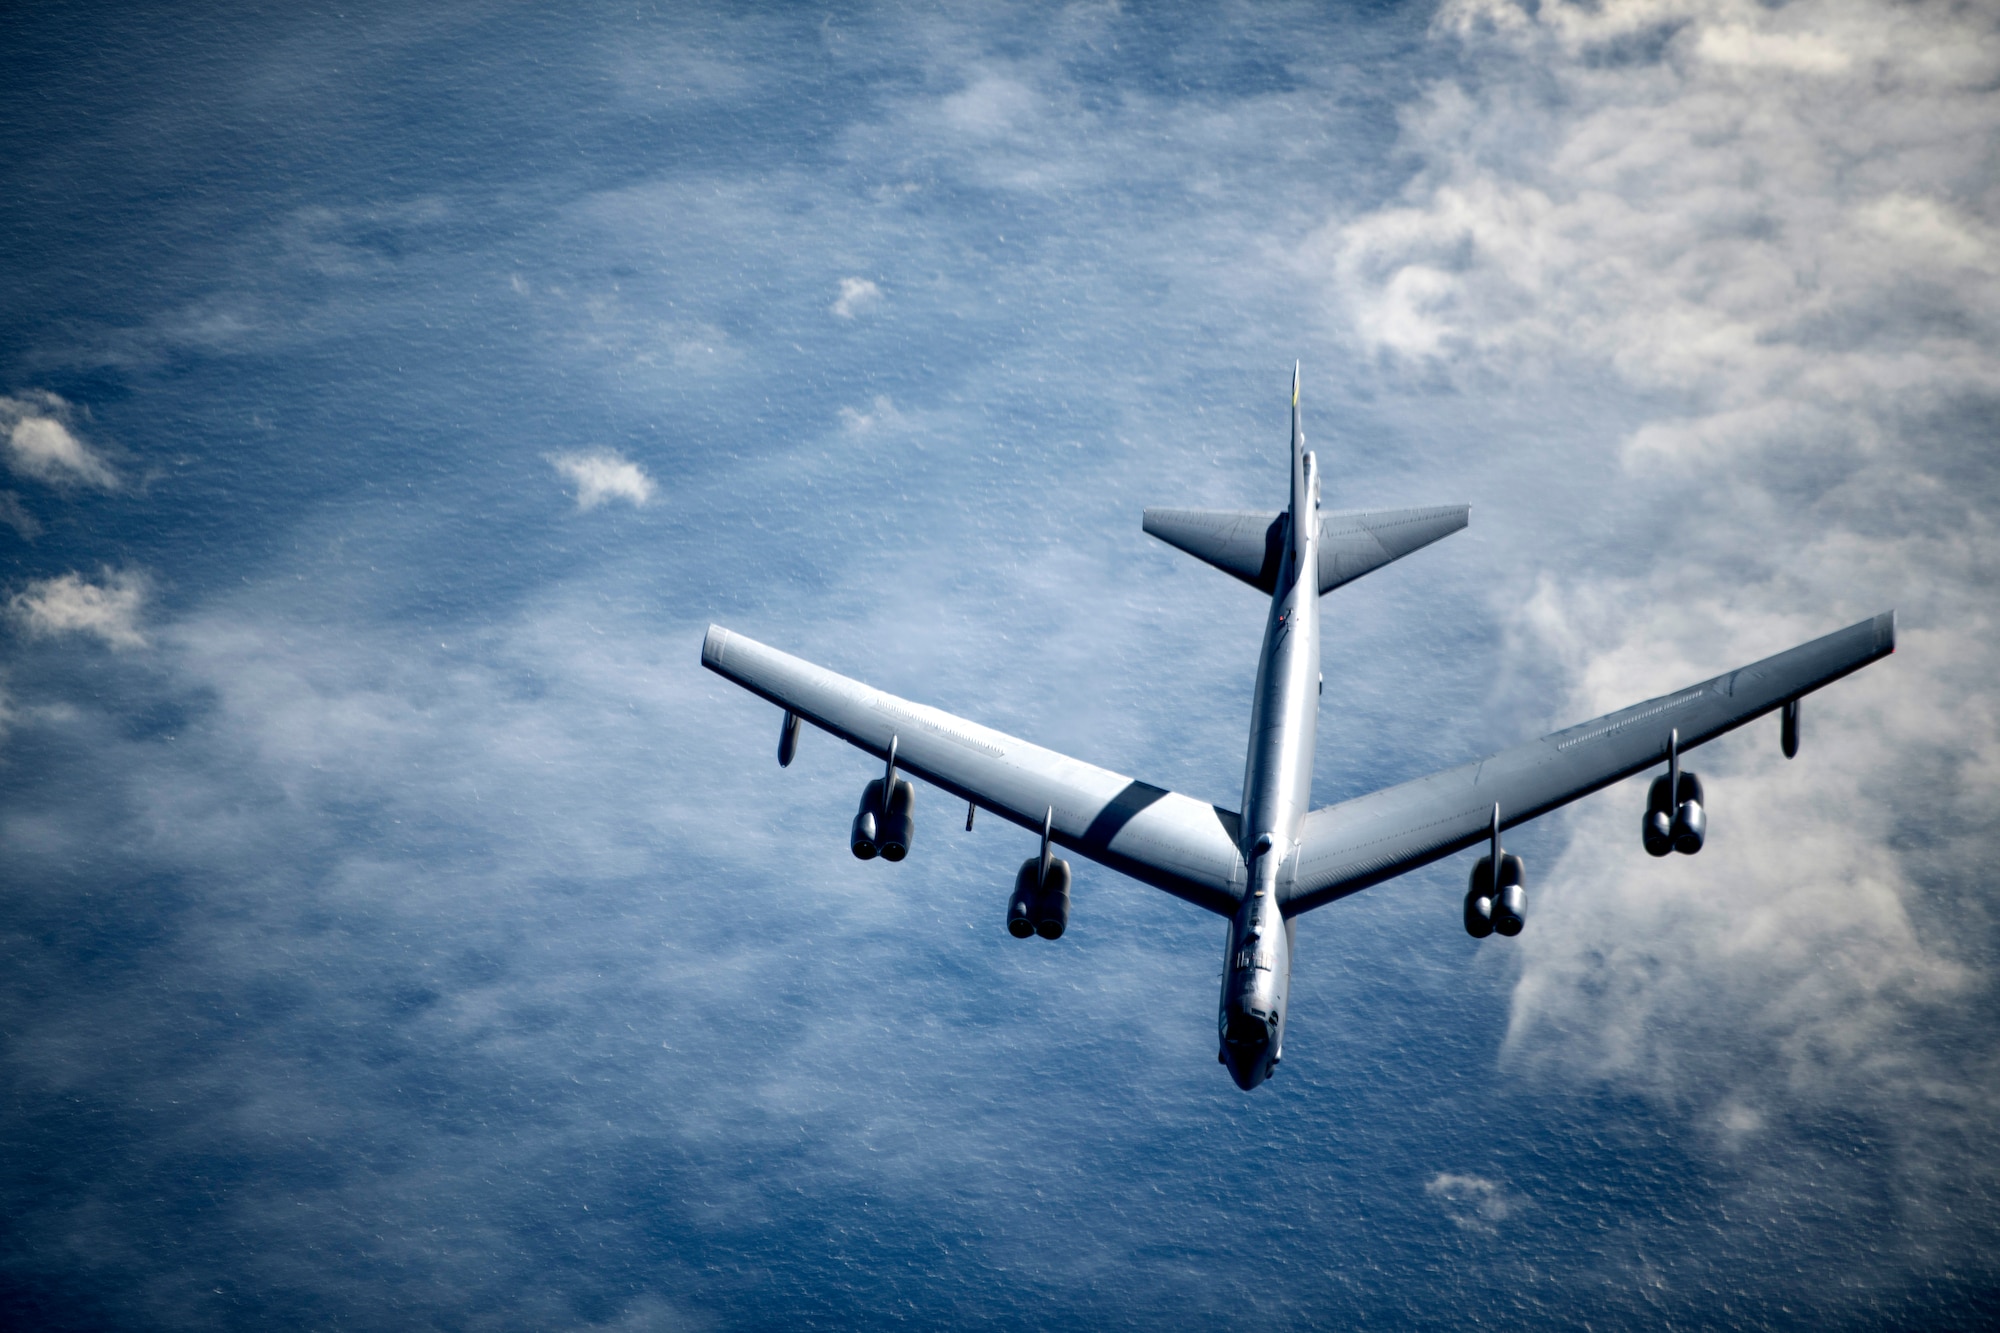 A U.S. Air Force B-52 Stratofortress breaks away from a KC-135 Stratotanker from the 100th Air Refueling Wing, RAF Mildenhall, England, after receiving fuel during a strategic bomber mission, May 7, 2020. Strategic bomber missions enable crews to maintain a high state of readiness and proficiency, and validate our always-ready global strike capability.